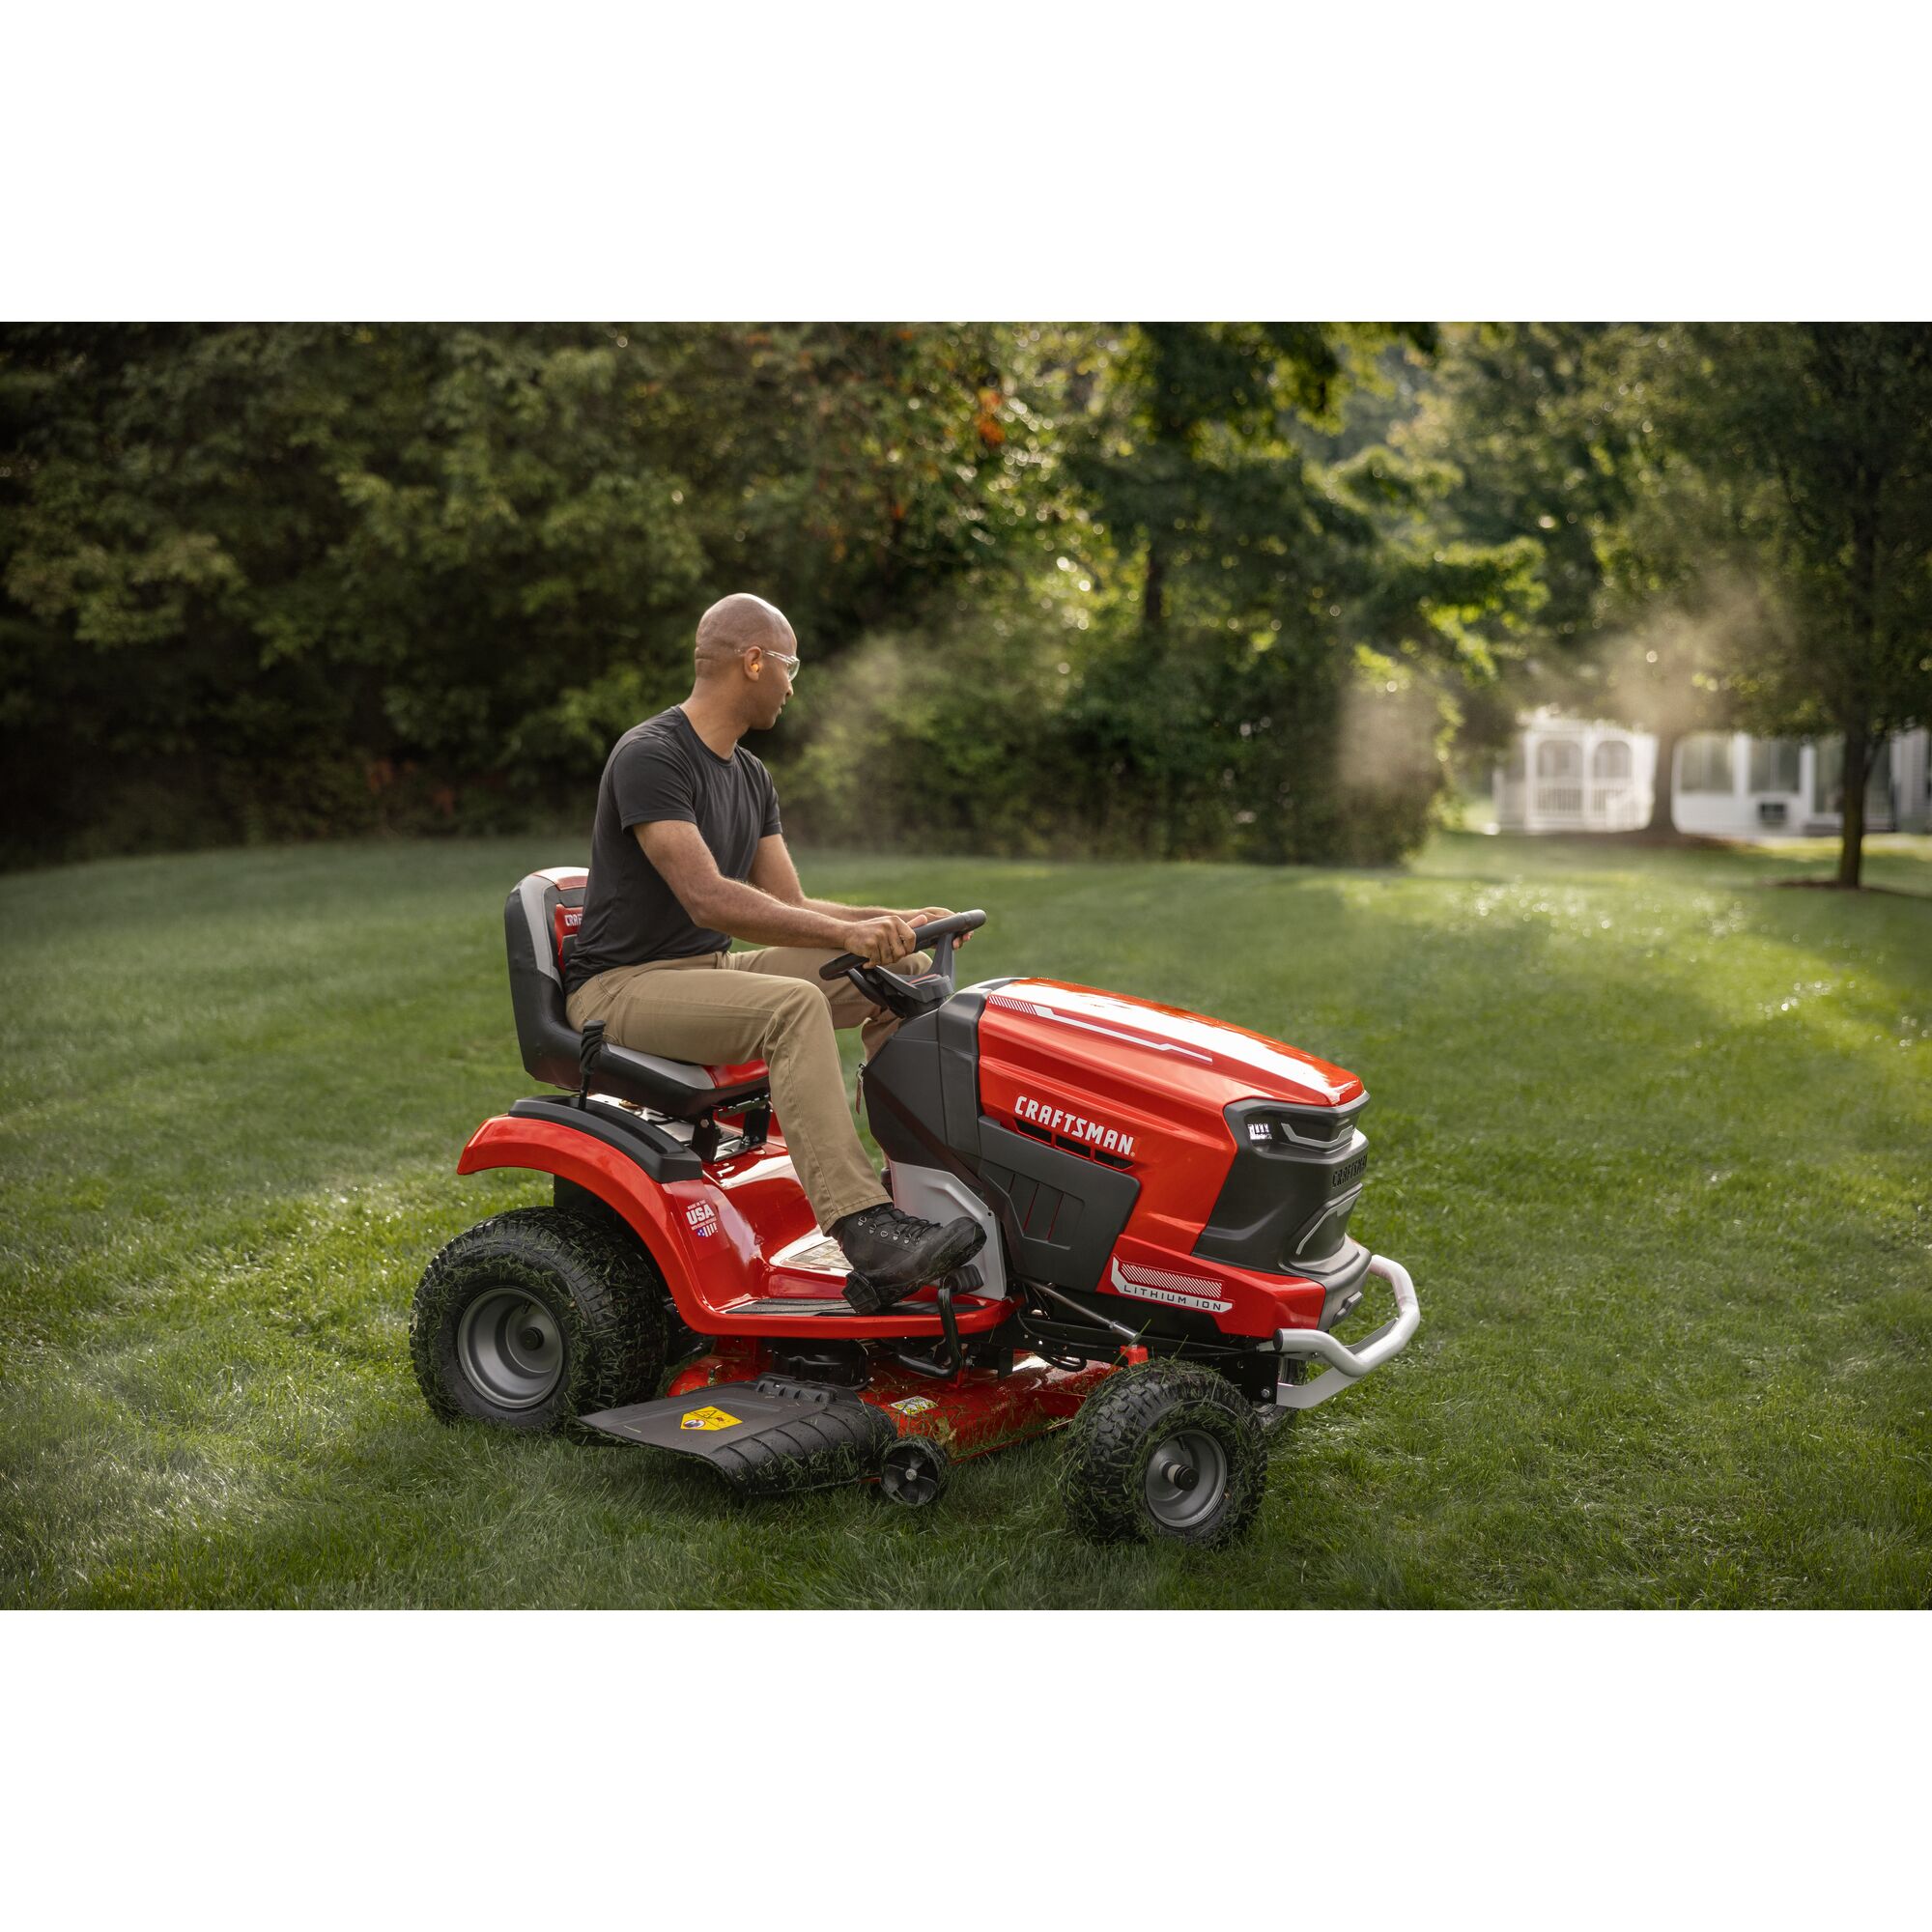 CRAFTSMAN Battery-Powered Riding Mower mowing background with woods and fence in background